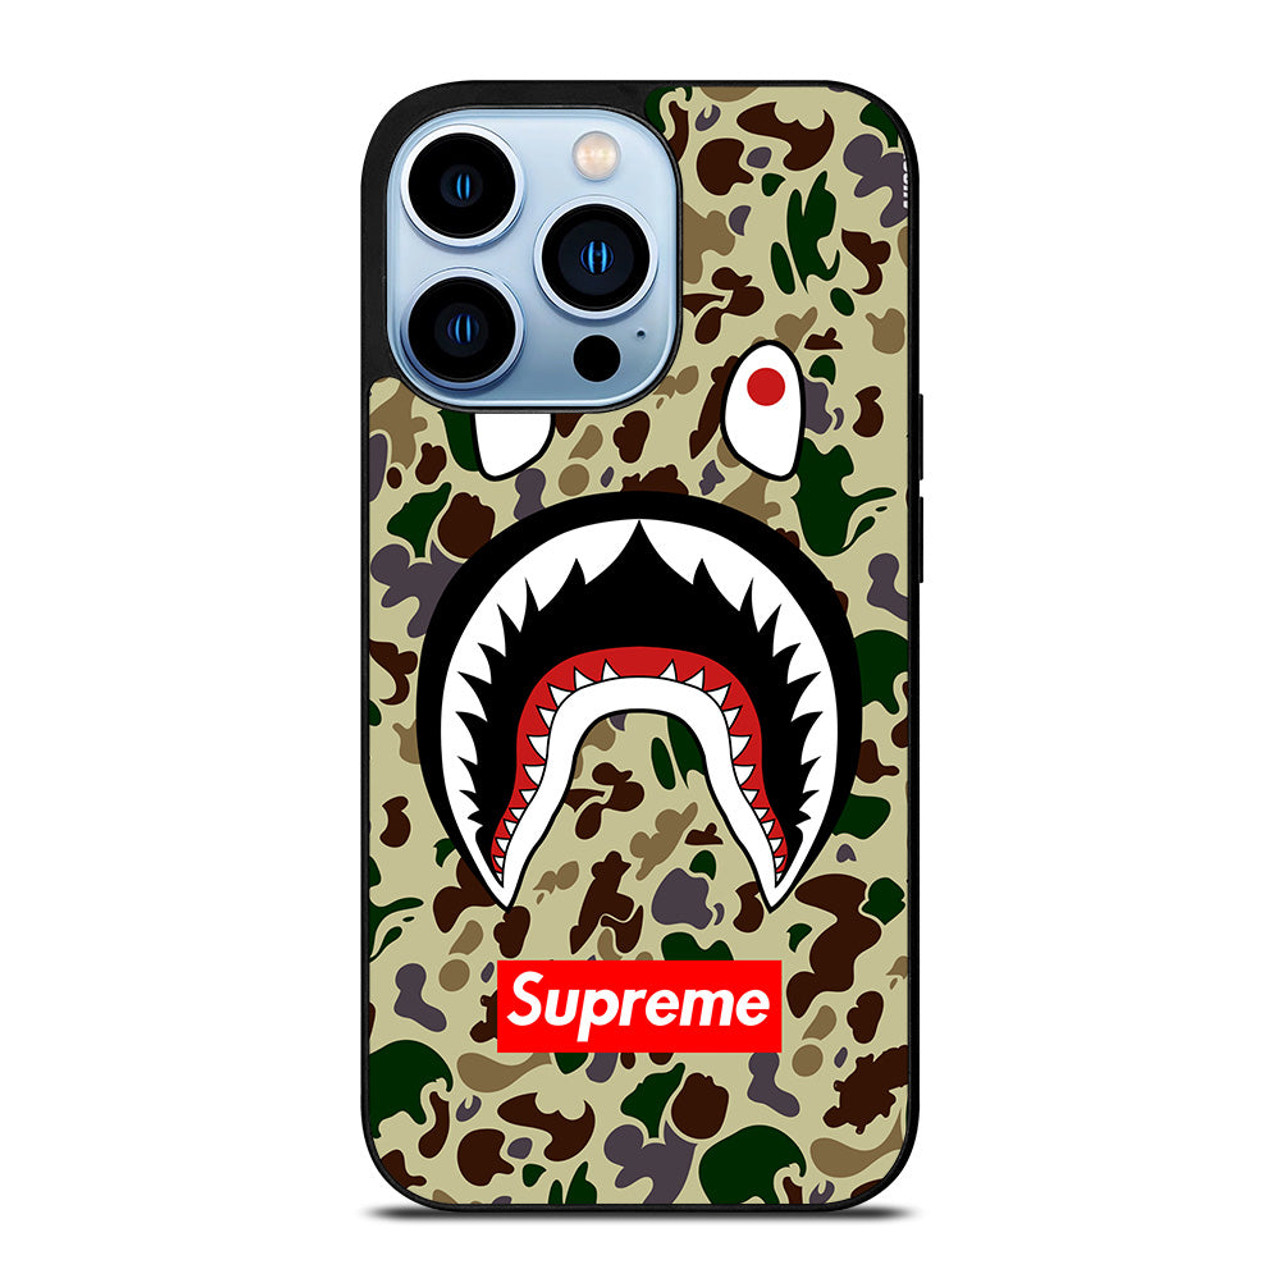 Supreme iPhone 13/13 pro/13 pro max case cool iphone 12/12 pro